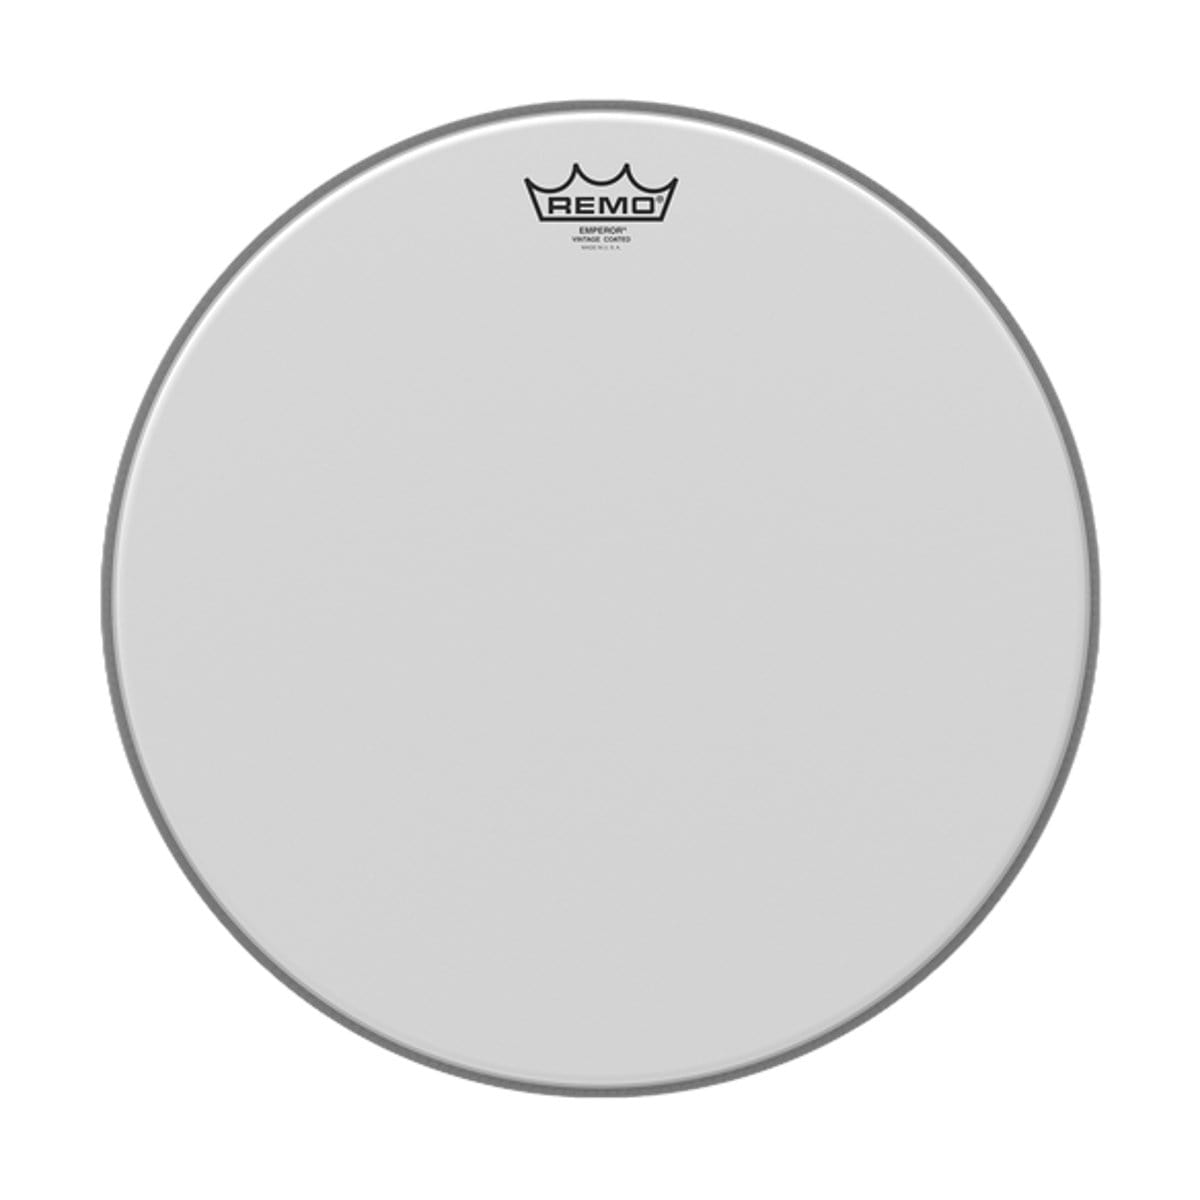 Remo Percussion Remo 16 Inch Drum Head Emperor Vintage Coated VE-0116-00 - Byron Music